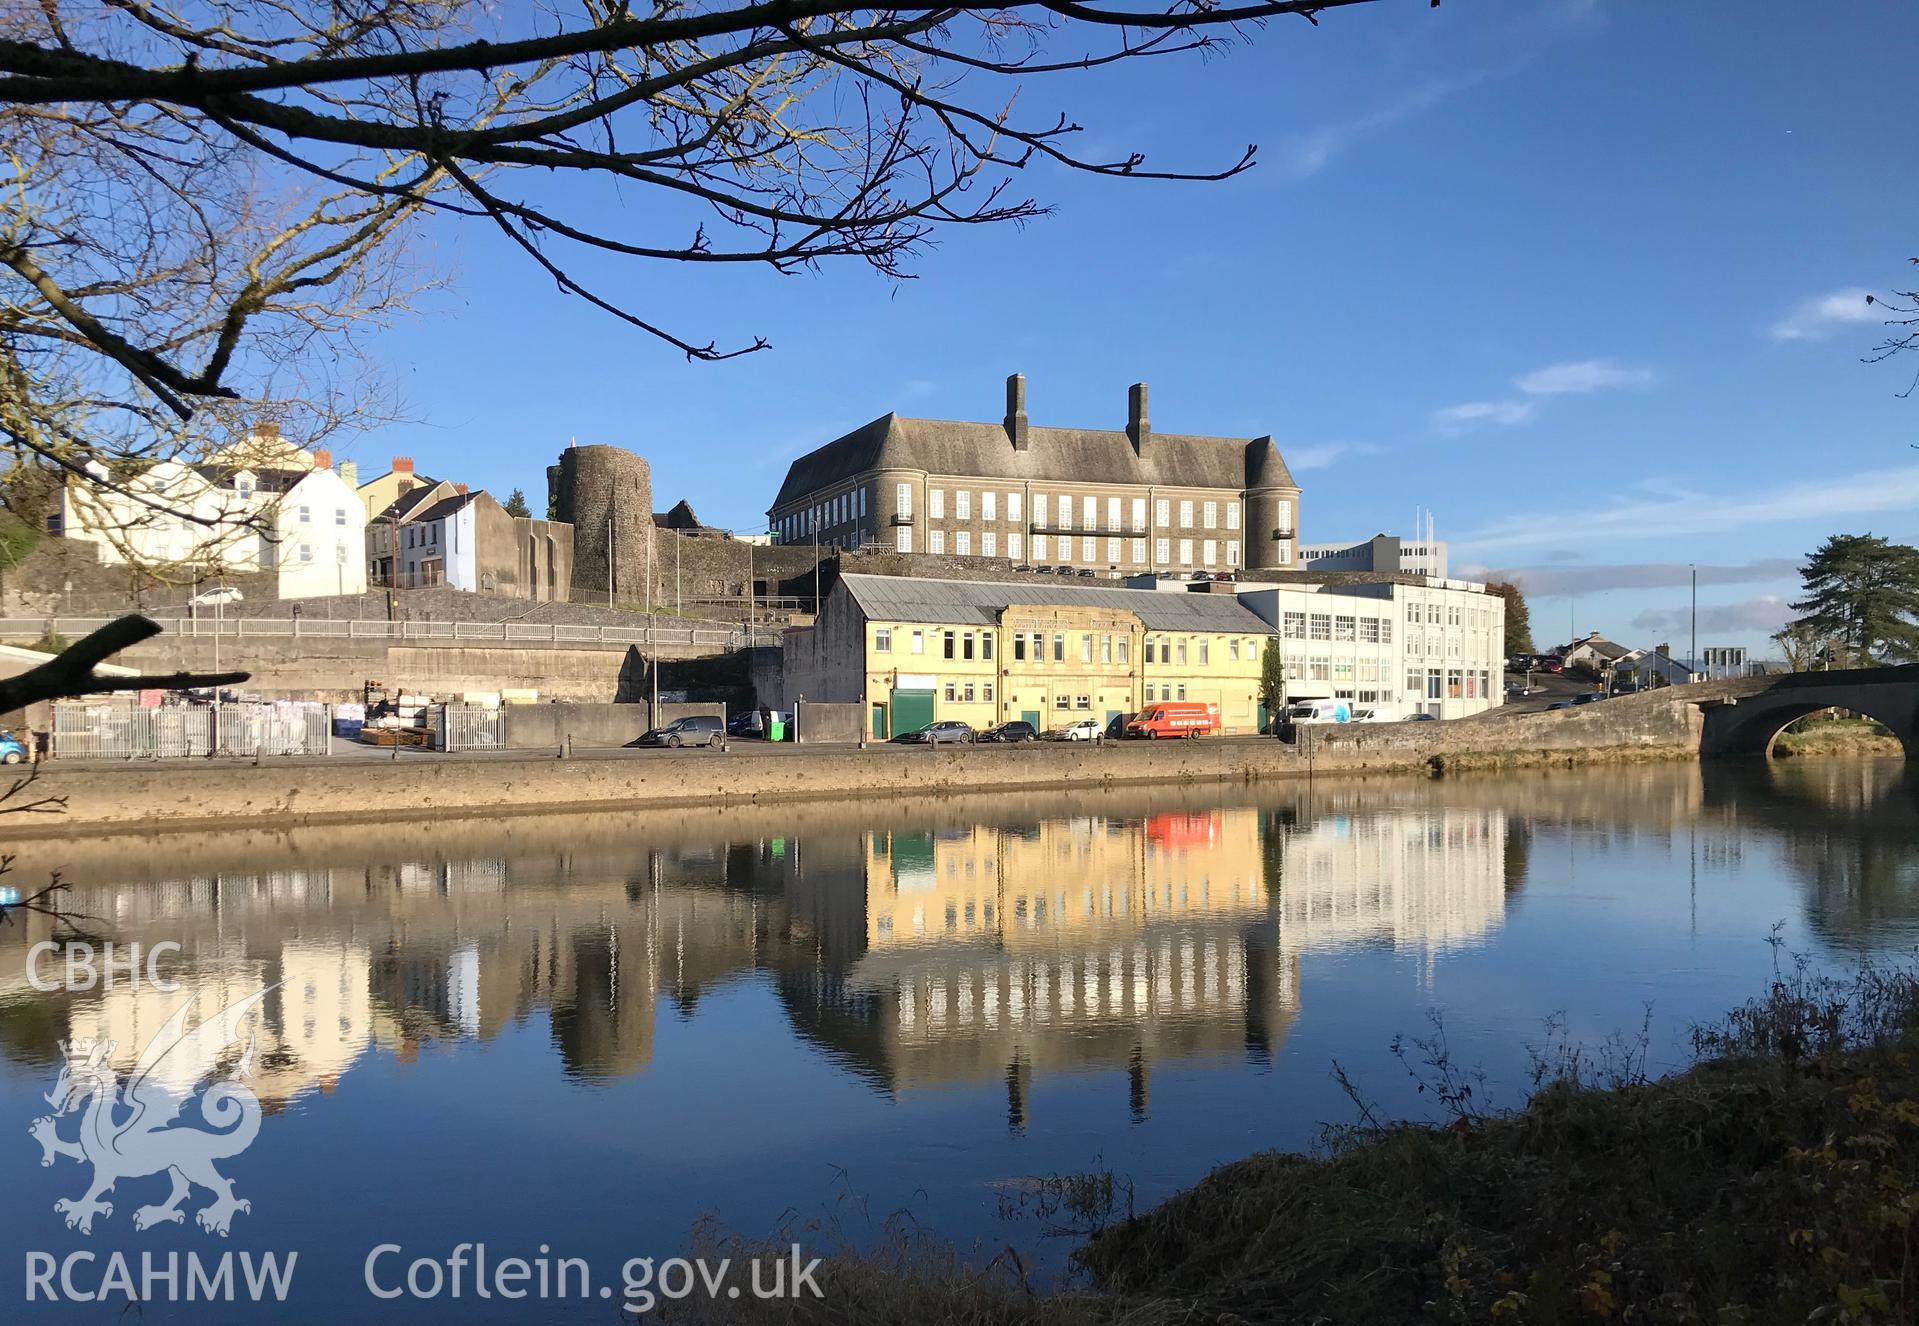 Digital colour photograph showing Carmarthen County Hall and Carmarthen Castle, overlooking the river Tywi, taken by Paul Davis on 20th November 2019.